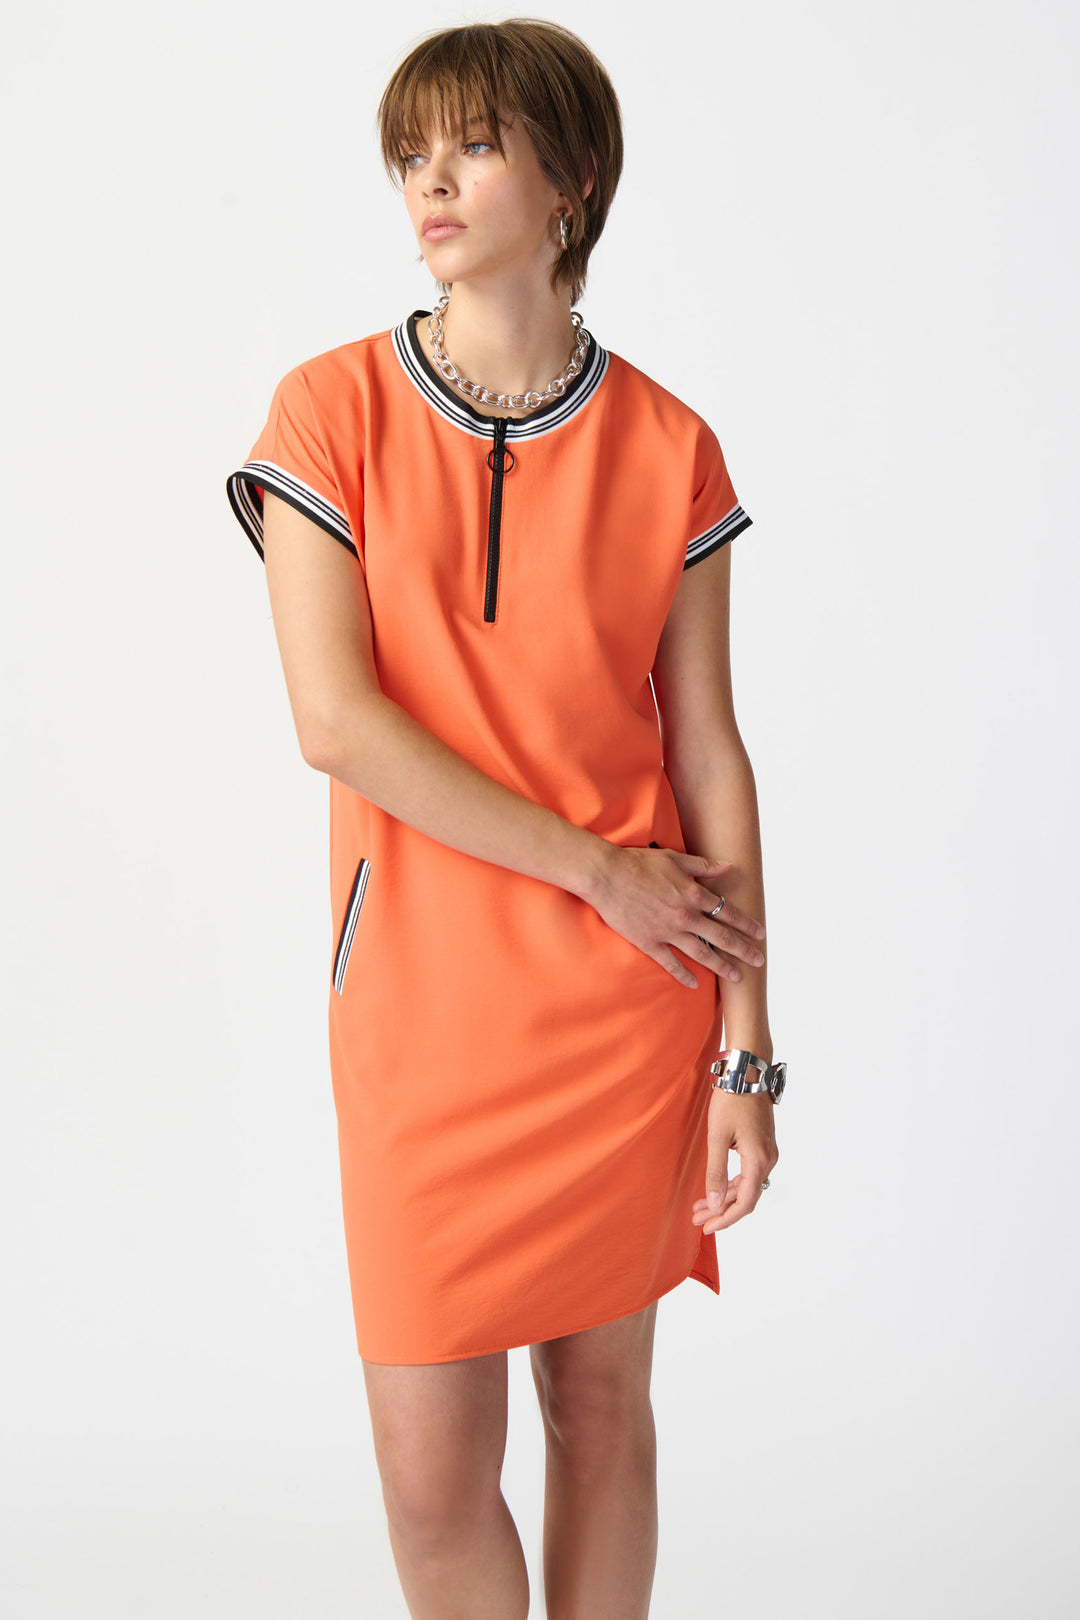 JOSEPH RIBKOFF Spring 2024 The light and relaxed fabric, combined with the quarter front zipper and contrast striped   detailing at the neckline and cuffs, adds a touch of sophistication.